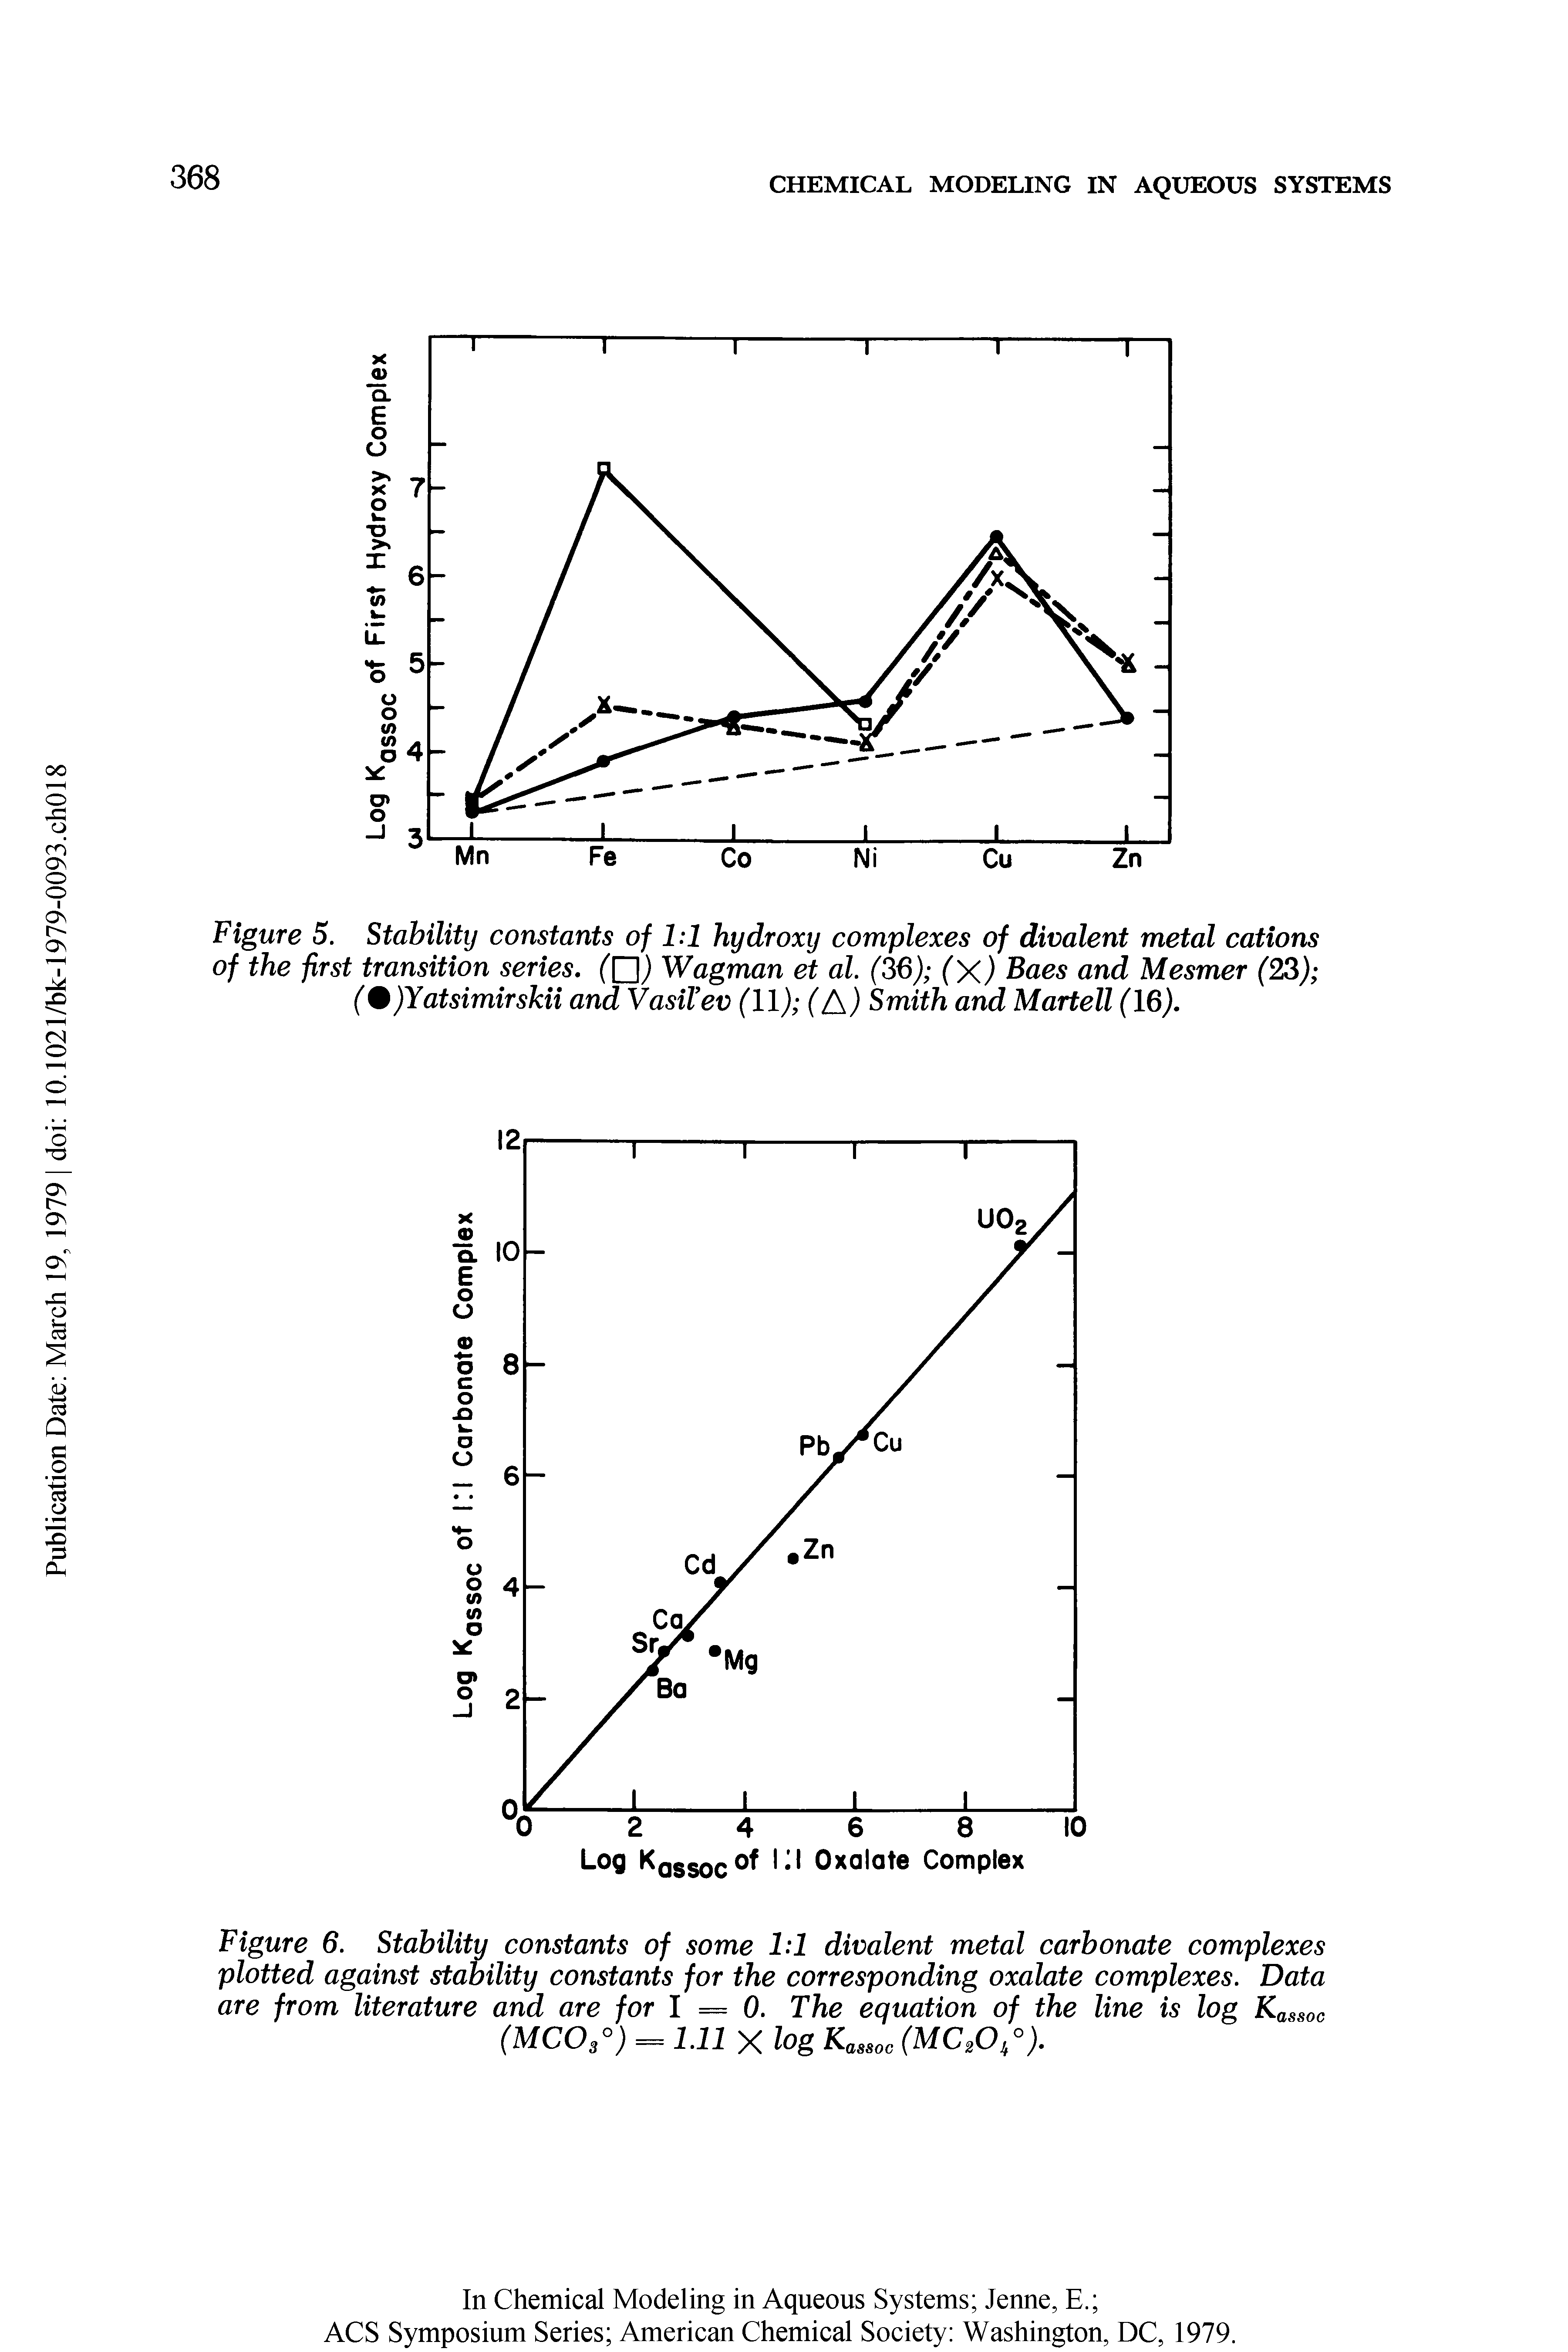 Figure 6. Stability constants of some hi divalent metal carbonate complexes plotted against stability constants for the corresponding oxalate complexes. Data are from literature and are for 1 = 0. The equation of the line is log Kassoc (MCOs ) = 1.11 X log Kassoc (MC OA)-...